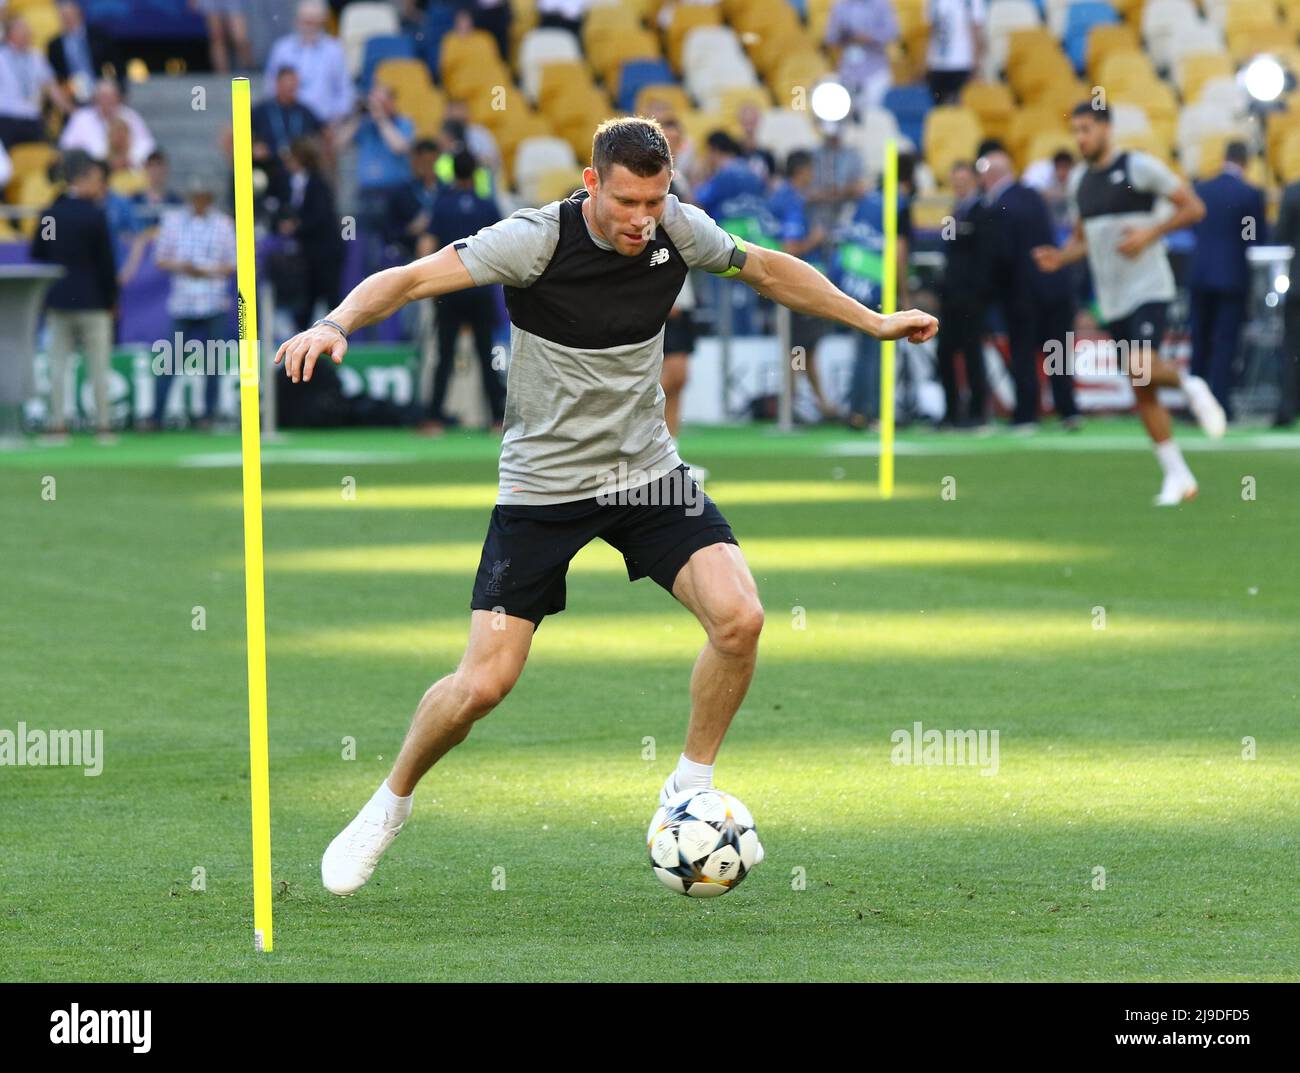 KYIV, UKRAINE - MAY 25, 2018: James Milner of Liverpool in action during training session before the UEFA Champions League Final 2018 game against Real Madrid in Kyiv, Ukraine Stock Photo